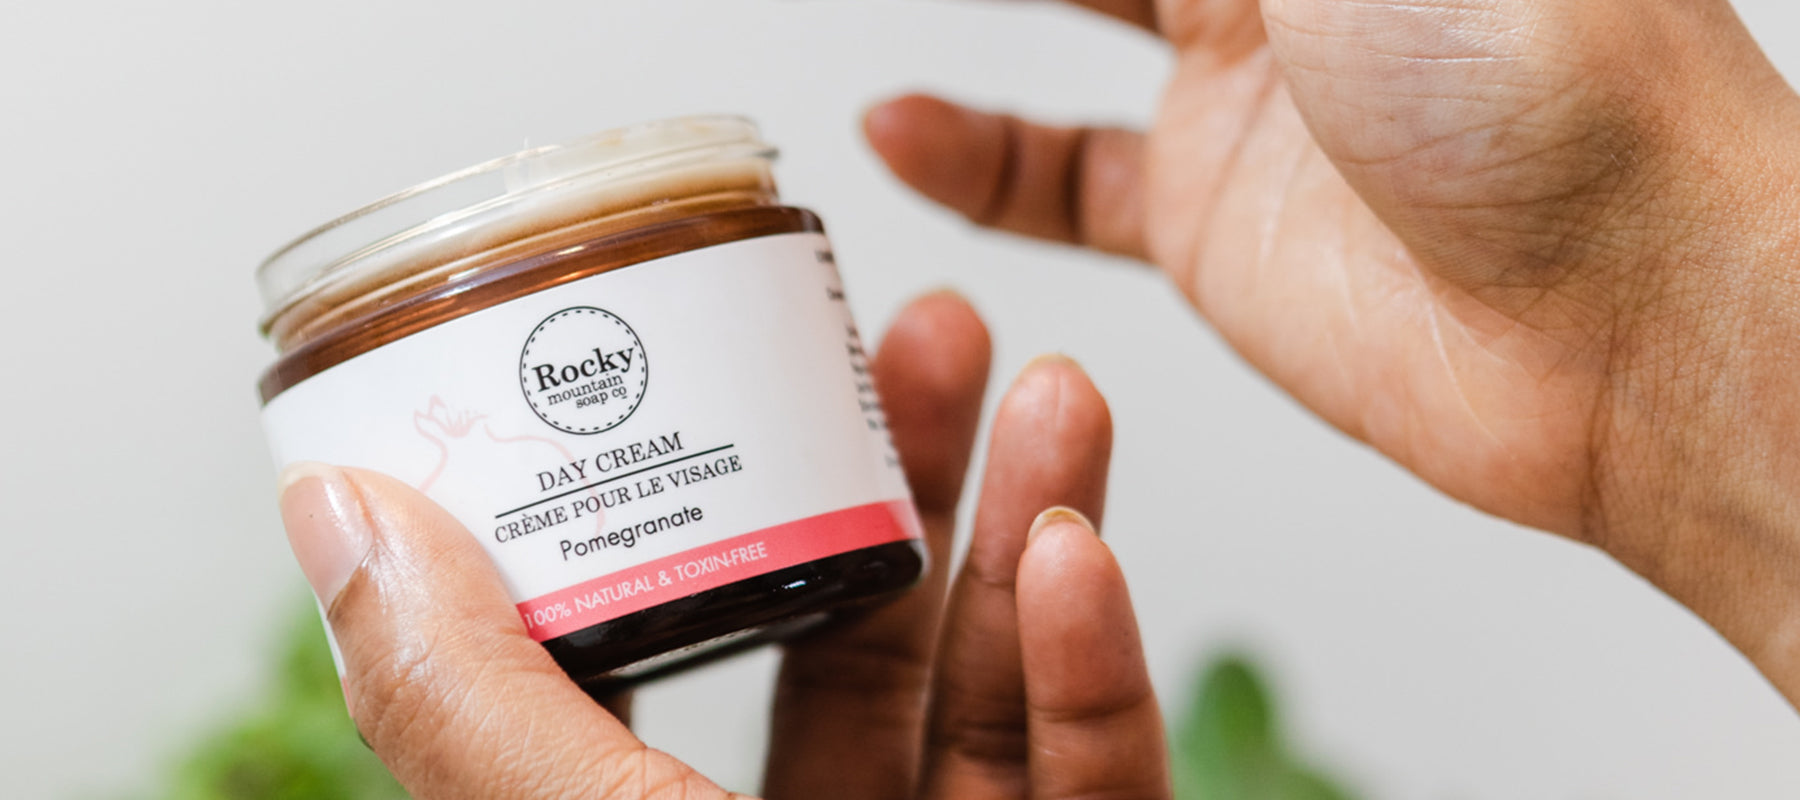 Hand holding an open jar of Rocky Mountain Soap Company Day Cream, a hydrating pomegranate face cream.  